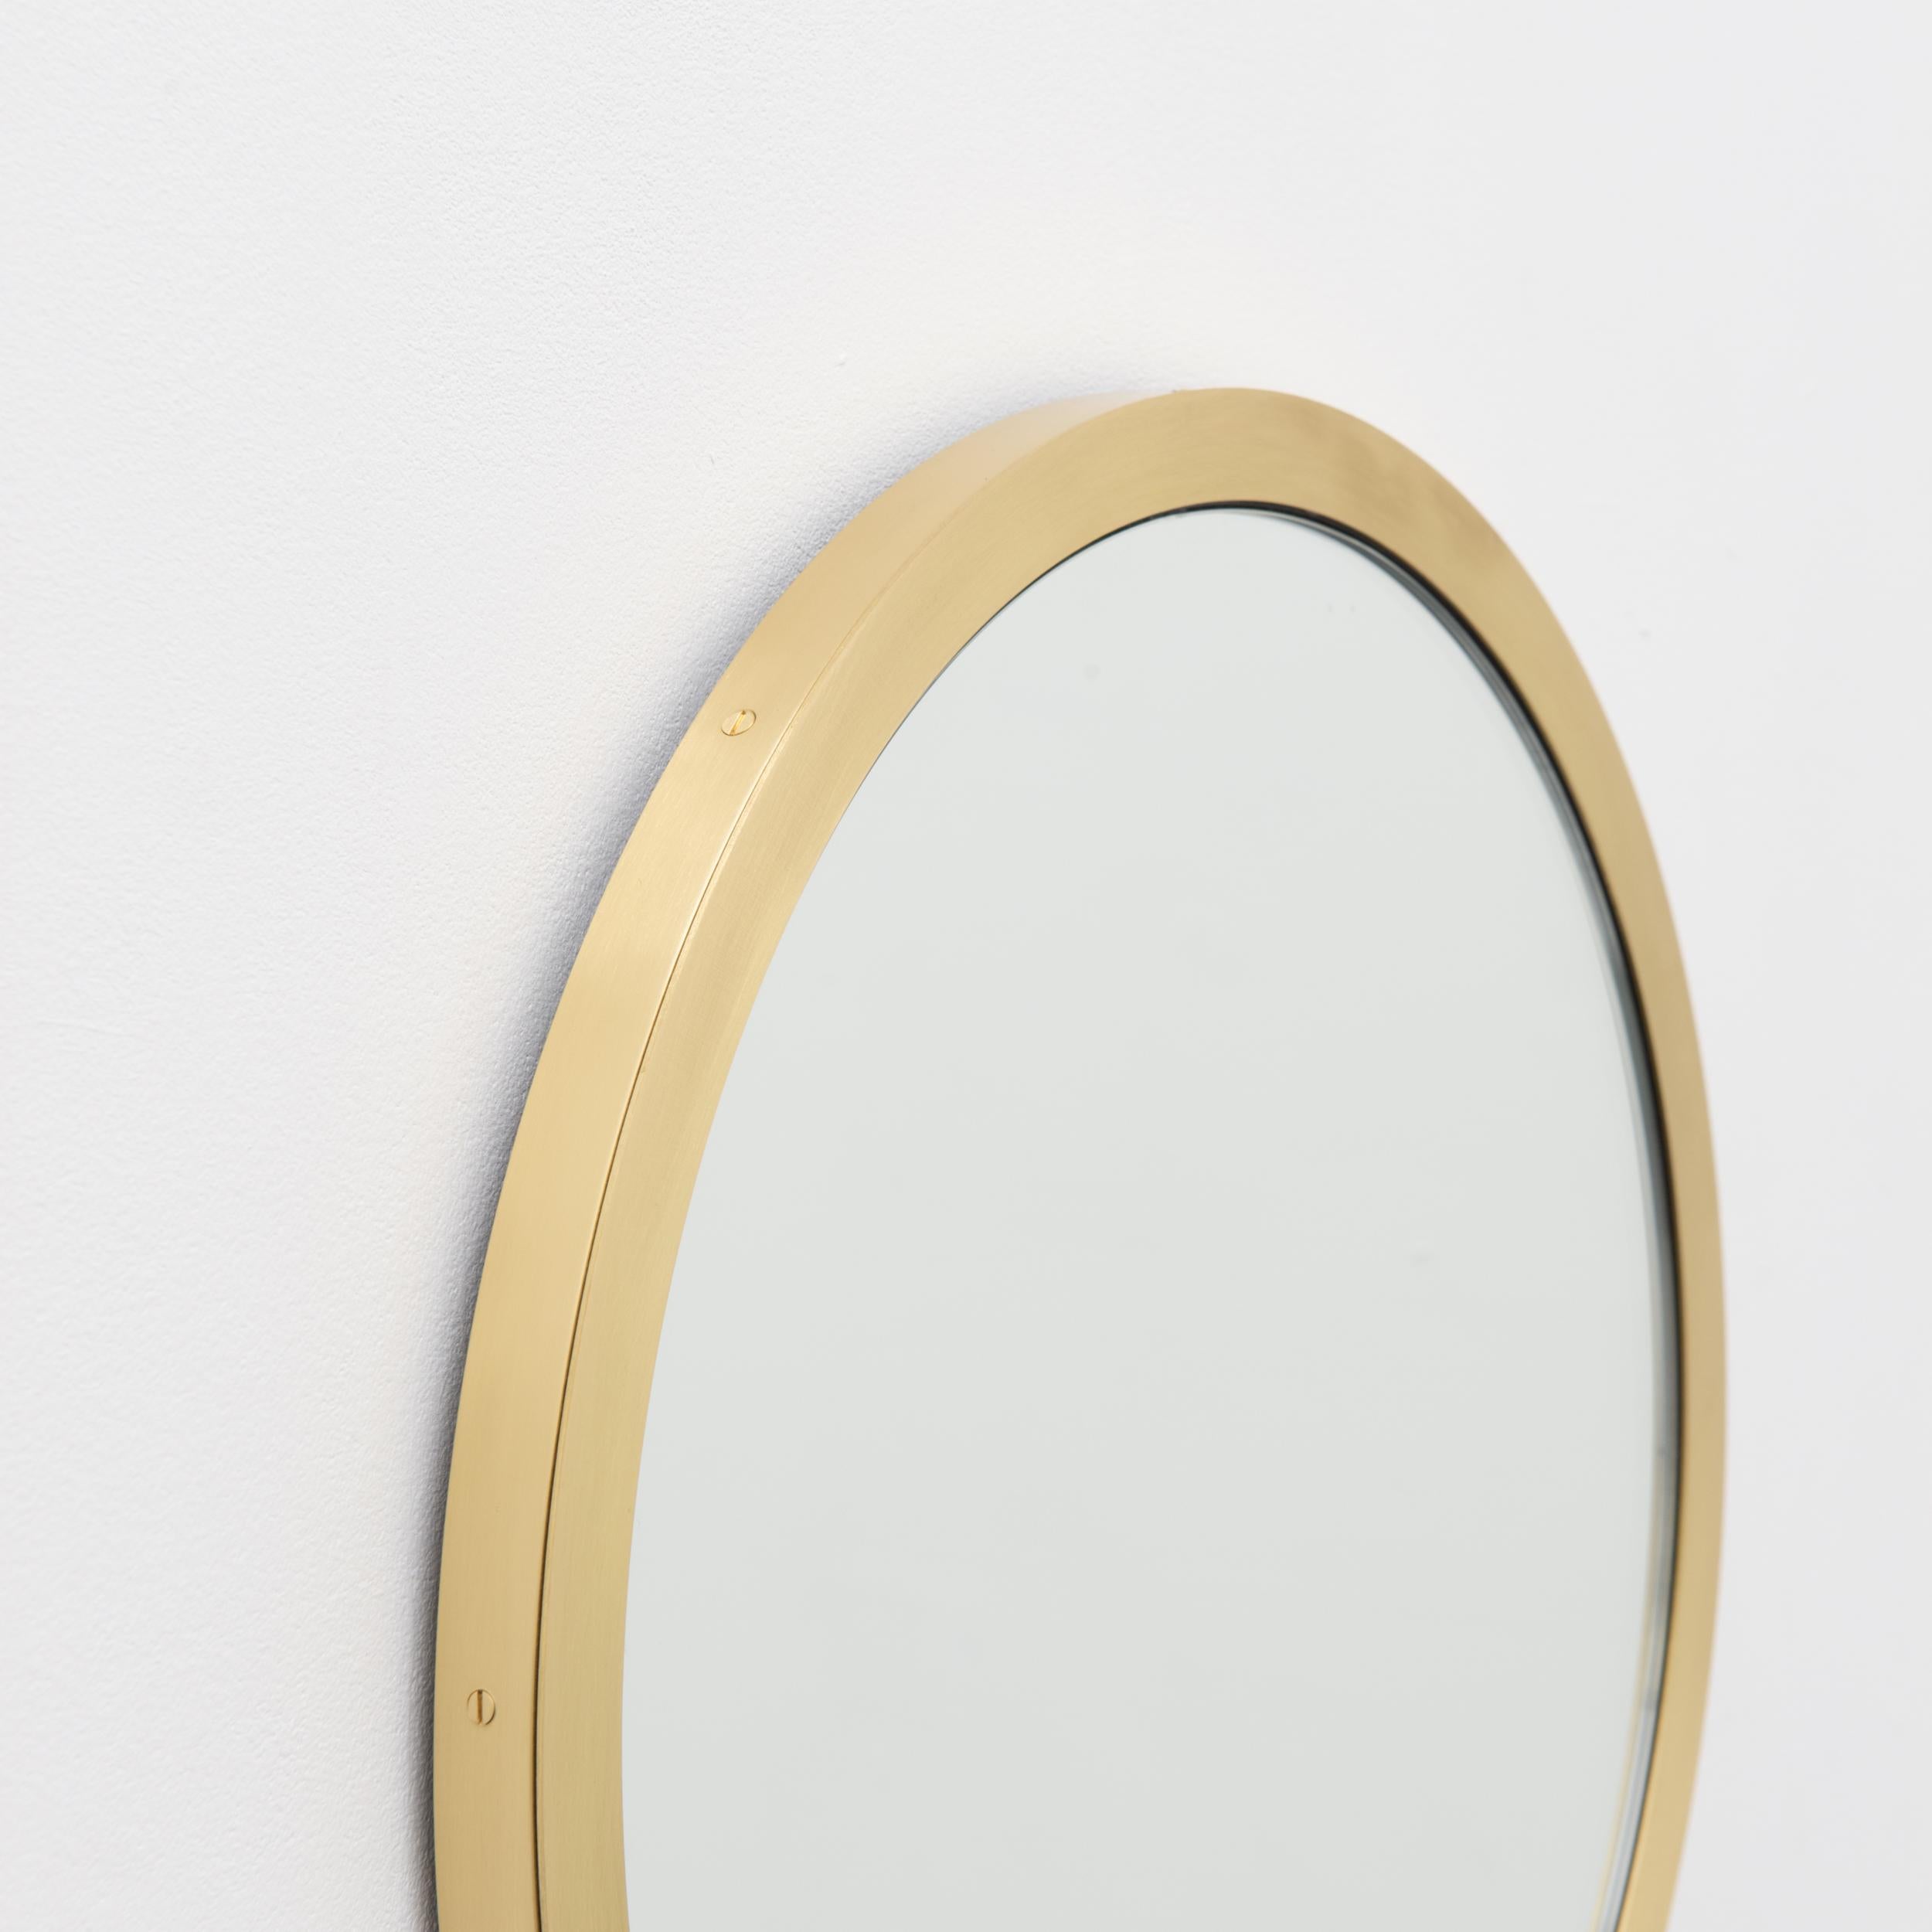 Orbis Round Art Deco Mirror with Full Brushed Brass Frame, Medium For Sale 4